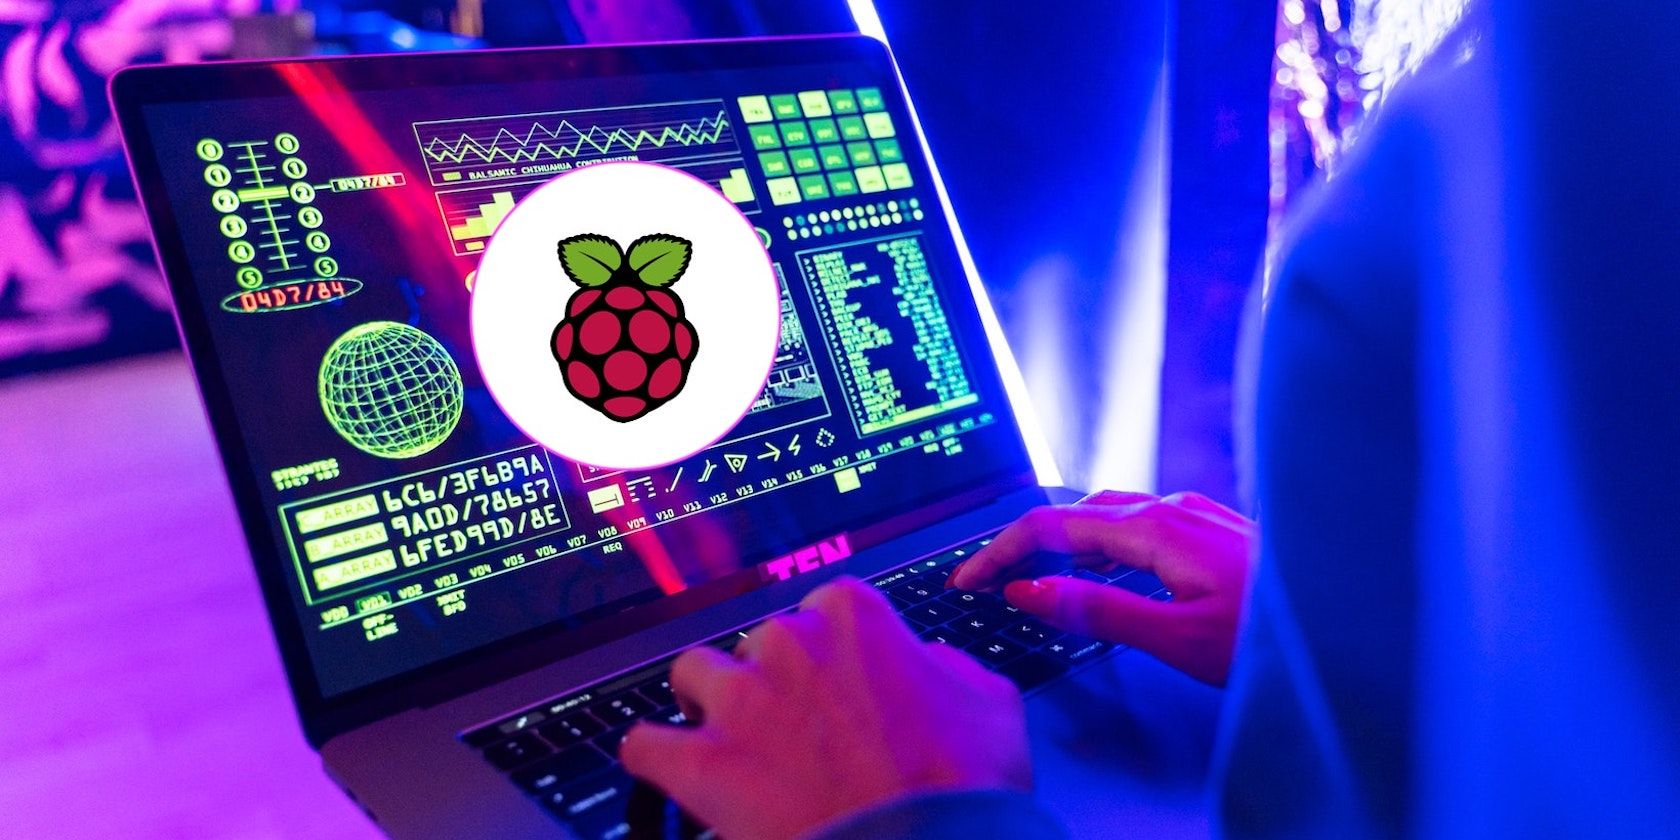 A man typing on a laptop showing neon green symbols and a raspberry pi logo